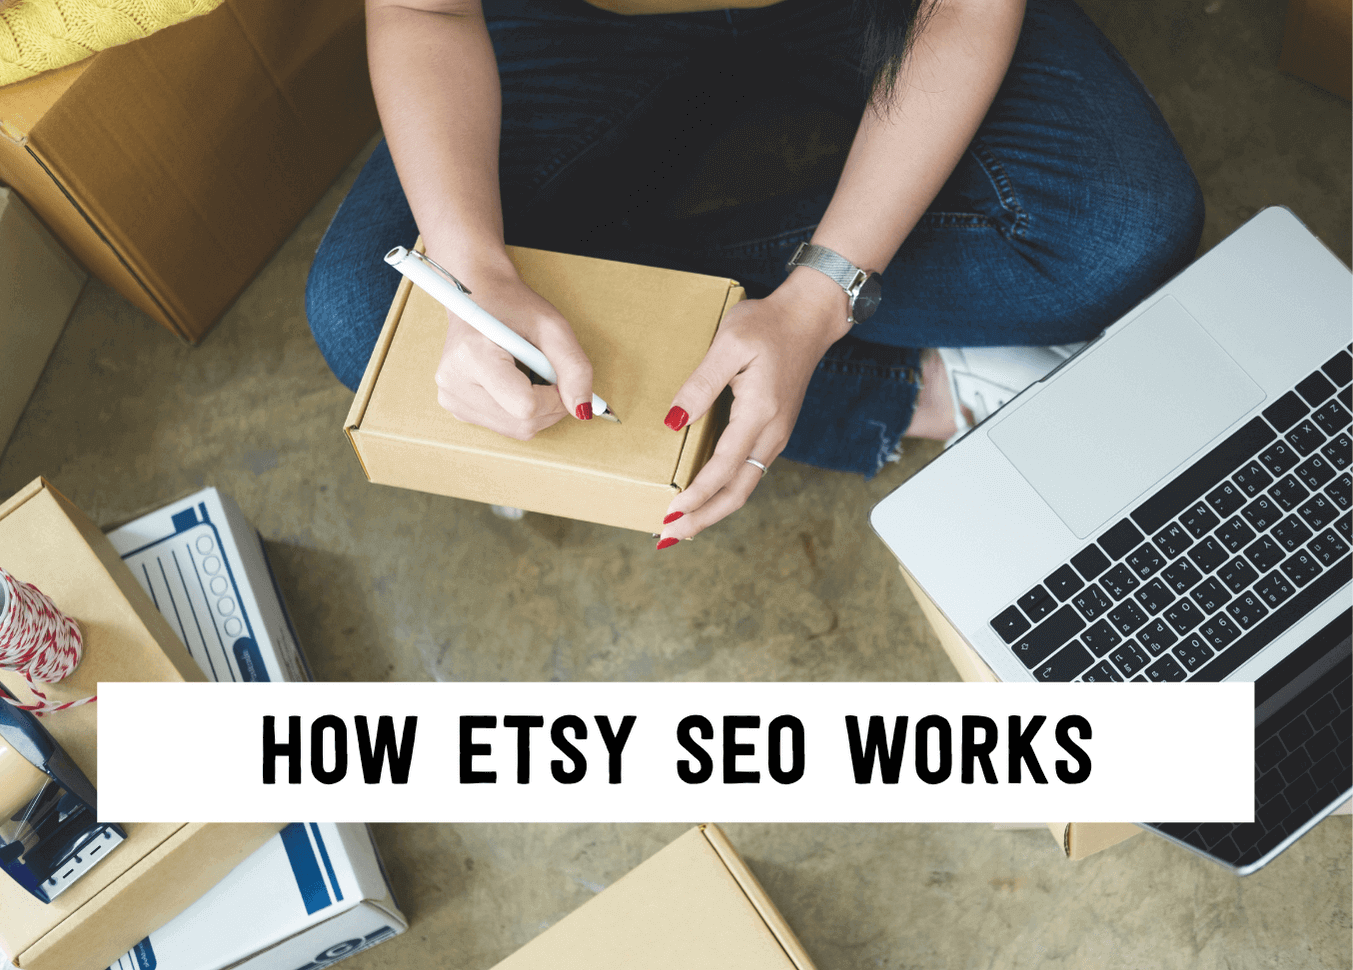 How etsy seo works | Tizzit.co - start and grow a successful handmade business